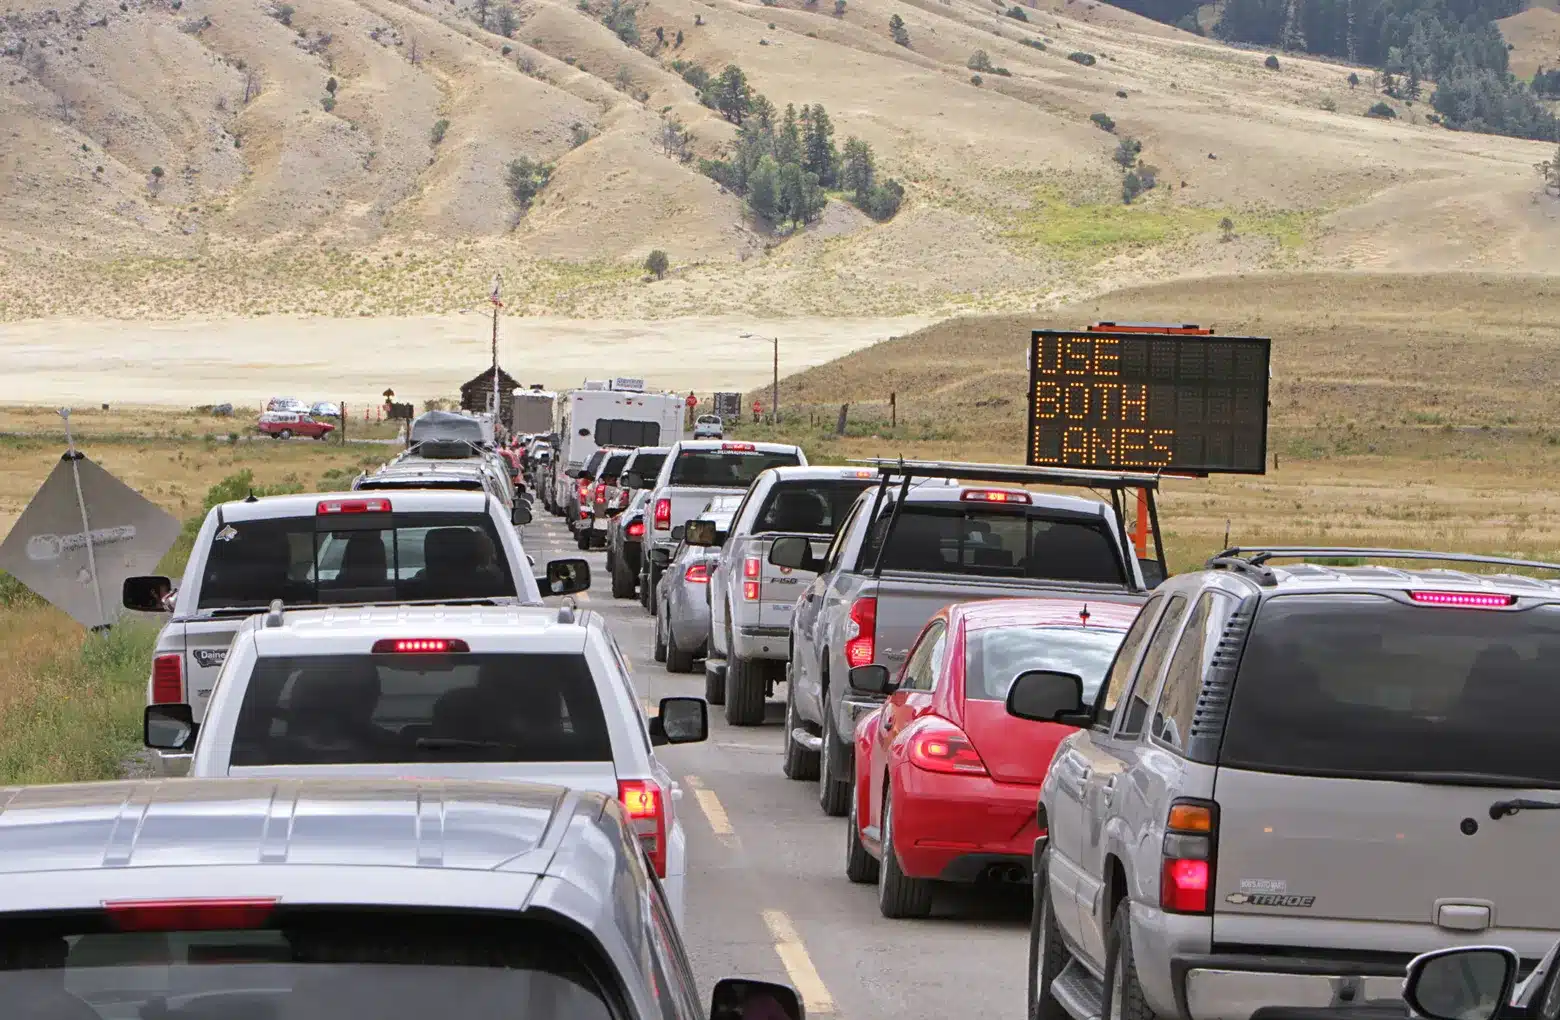 Traffic waits in queue at the North Entrance to Yellowstone National Park, July 2015. That year, Yellowstone saw about 4.1 million visitors. Last year, the park admitted half a million more visitors through its gates. Photo by Jim Peaco/NPS